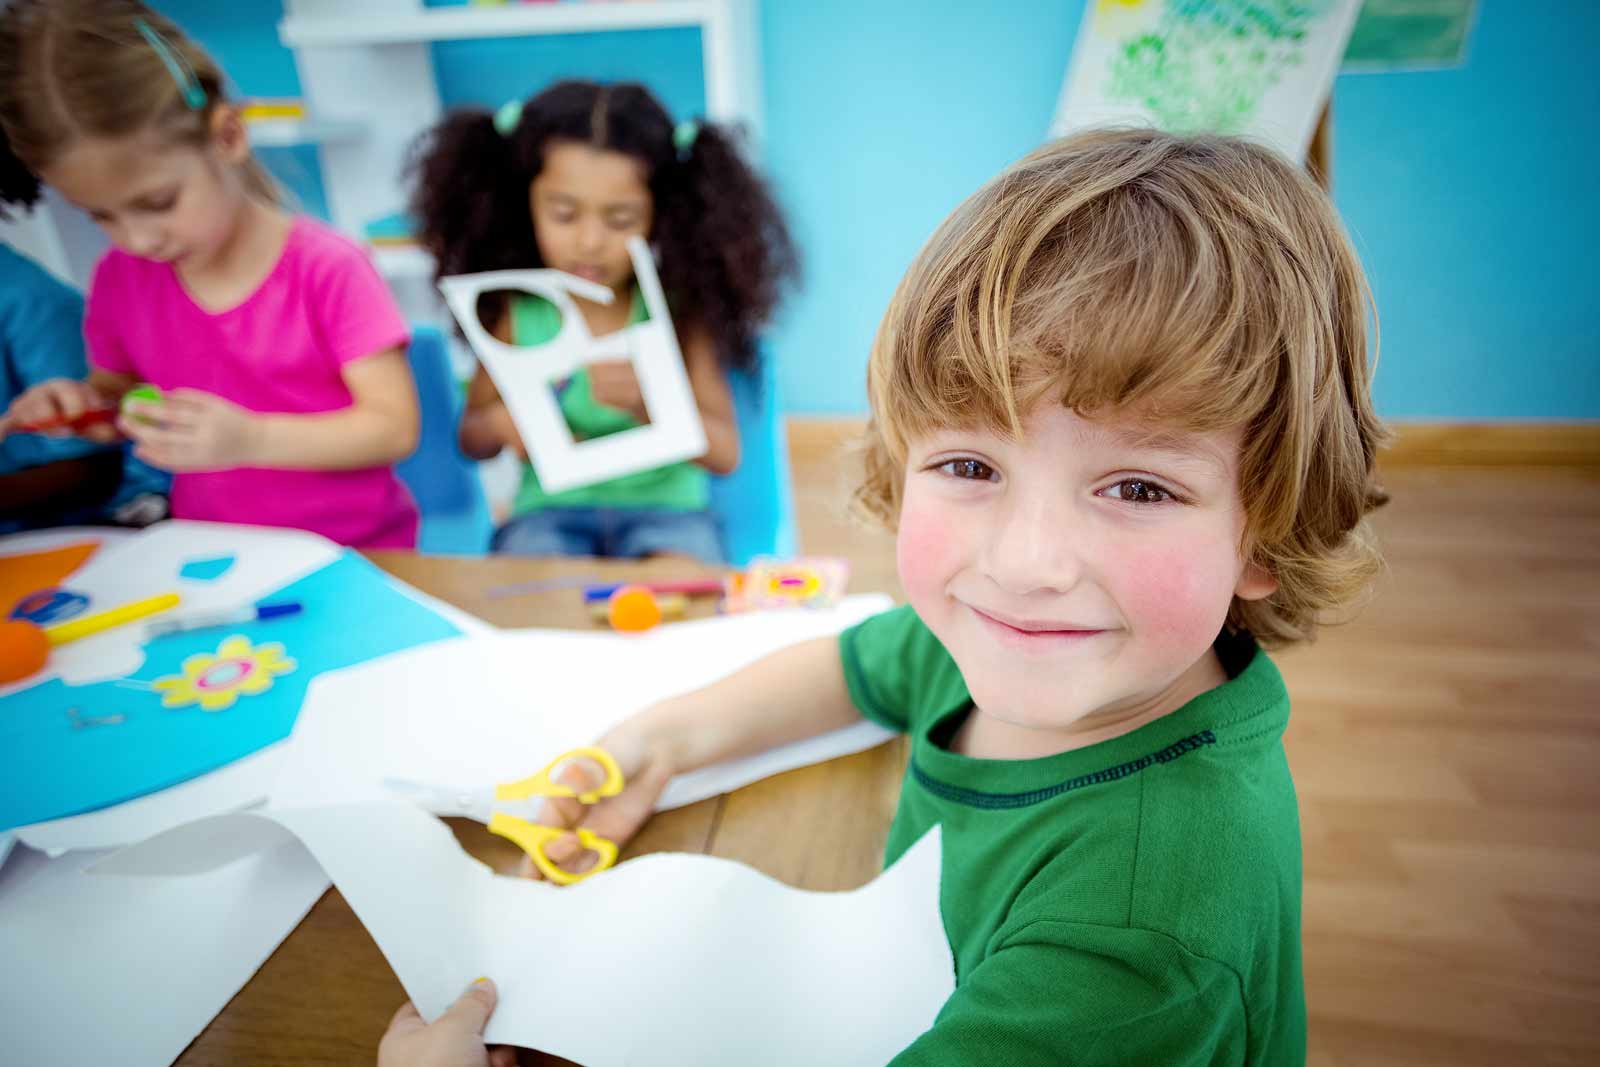 A little boy smiles at the camera while he and his two friends do arts and crafts projects.